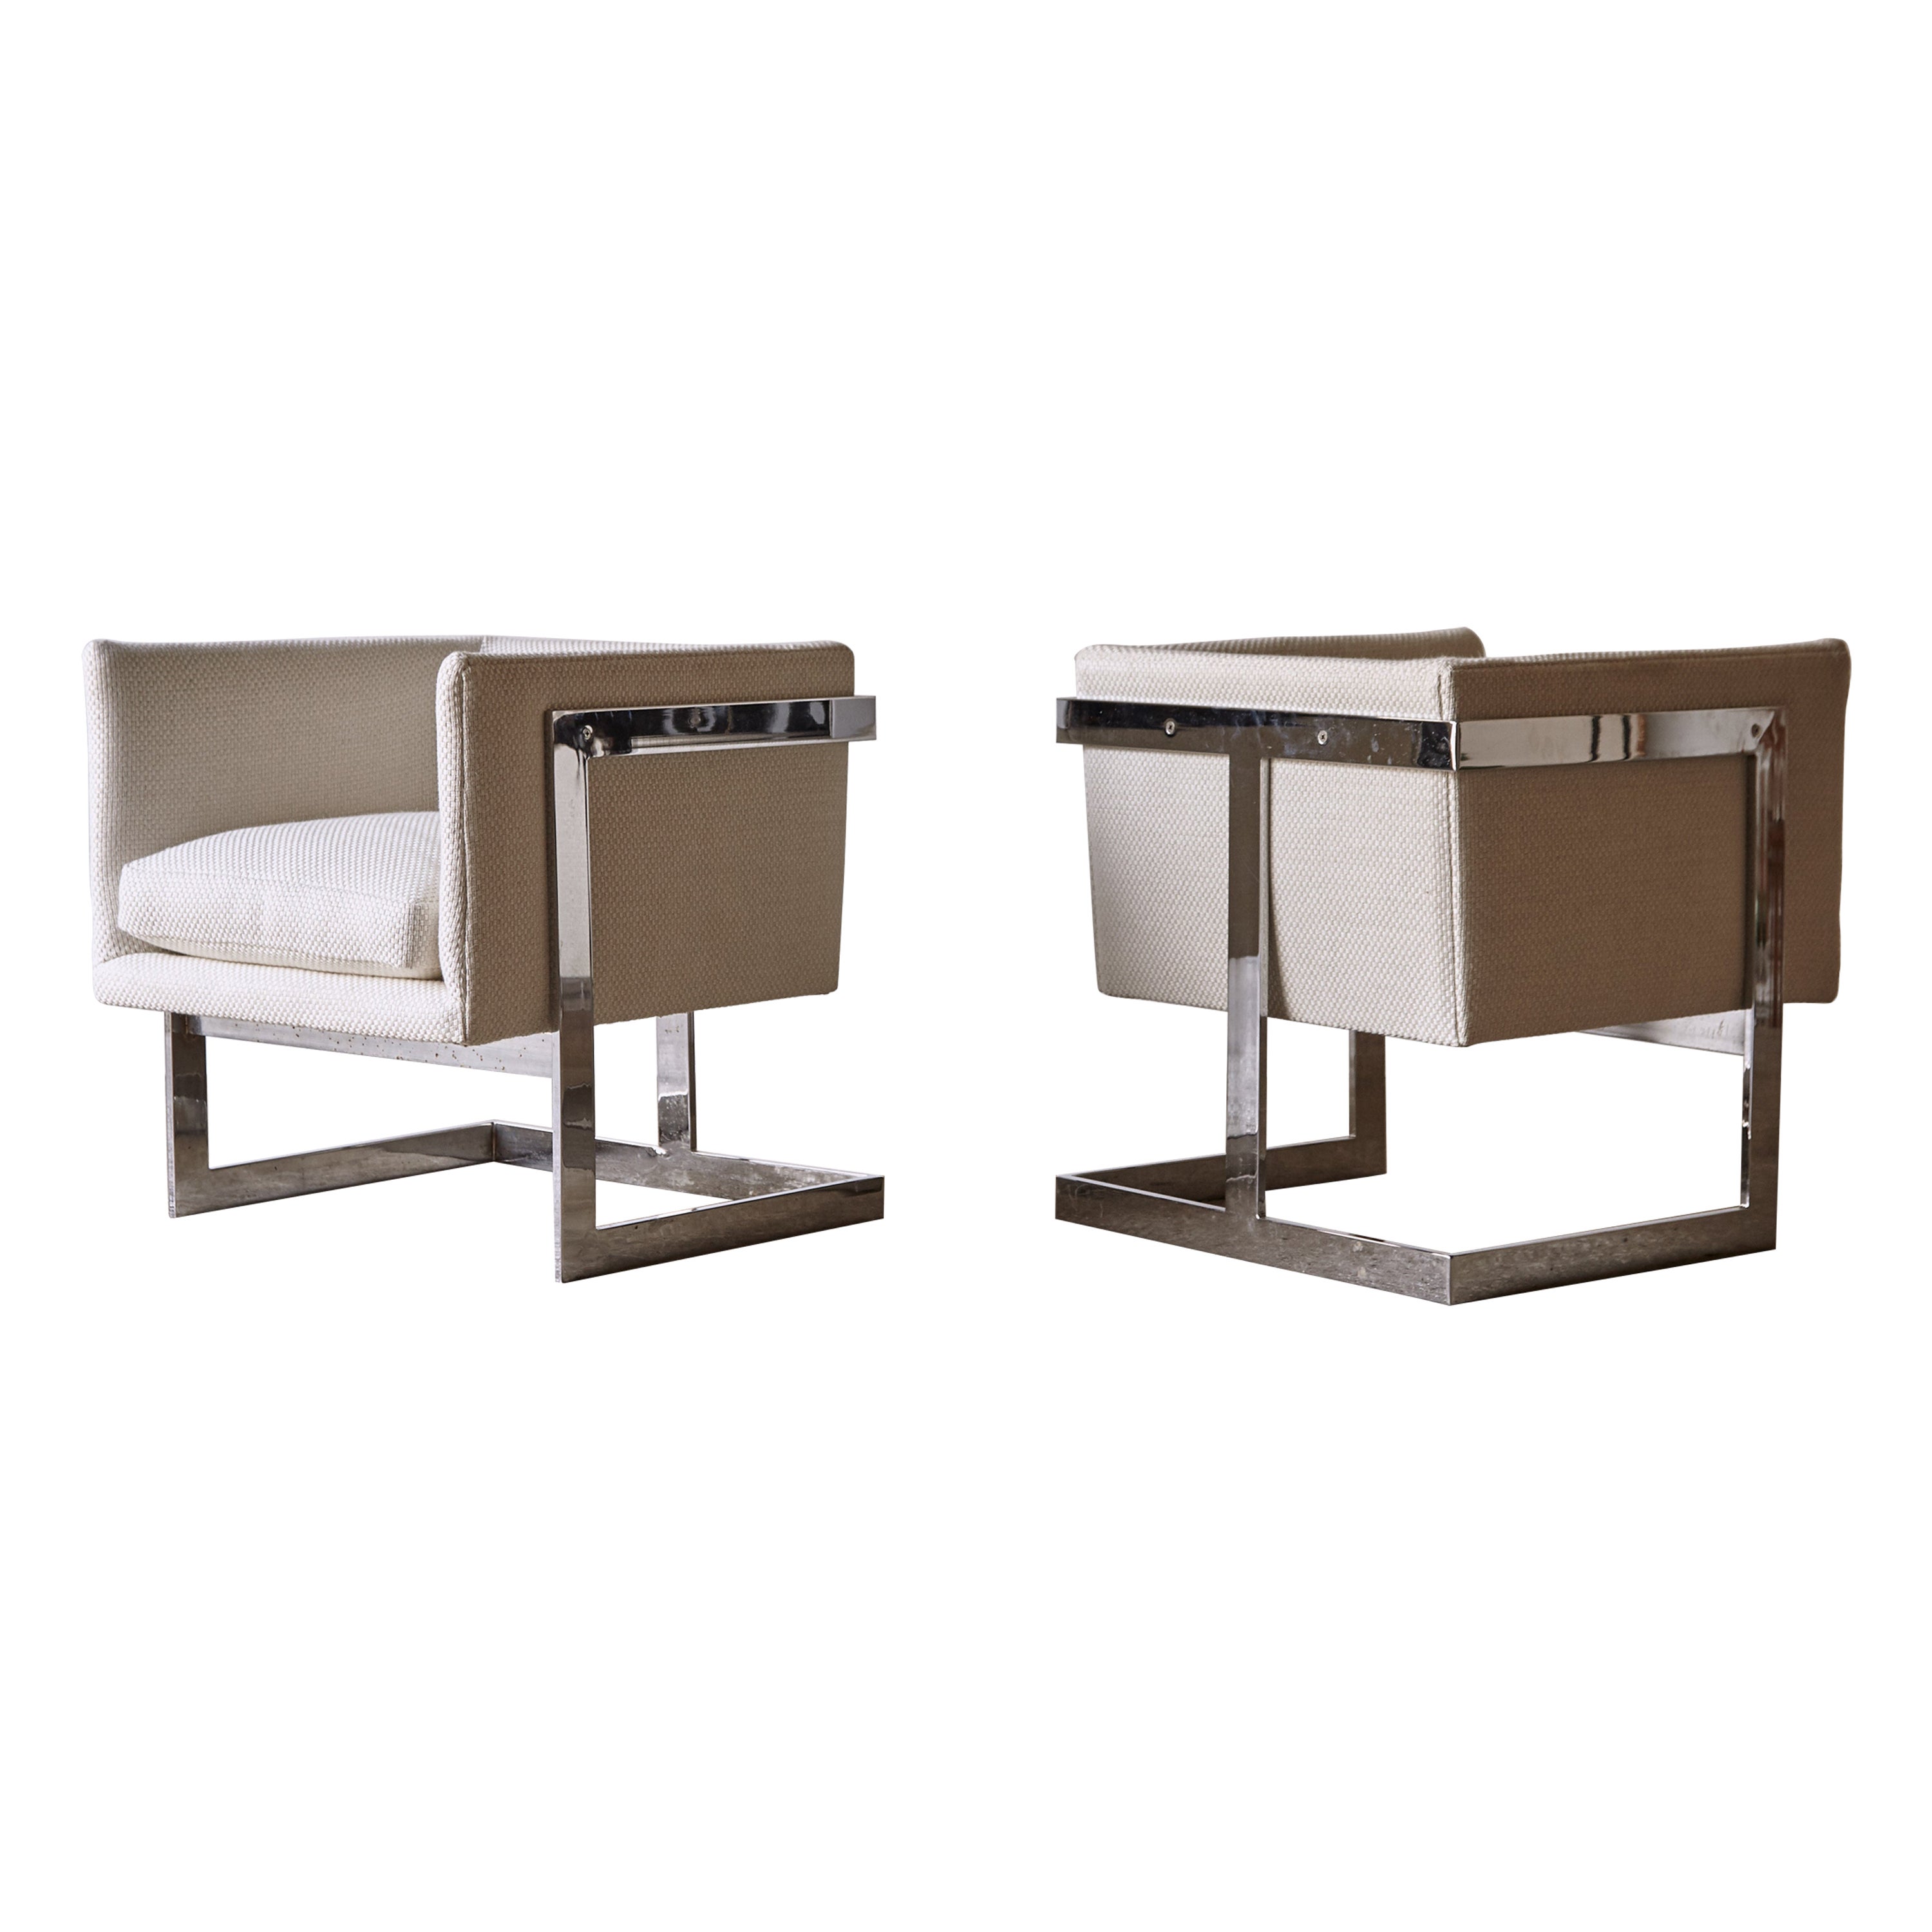 Pair of Milo Baughman Cube T-Back Lounge Chairs, Thayer Coggin, USA, 1970s For Sale